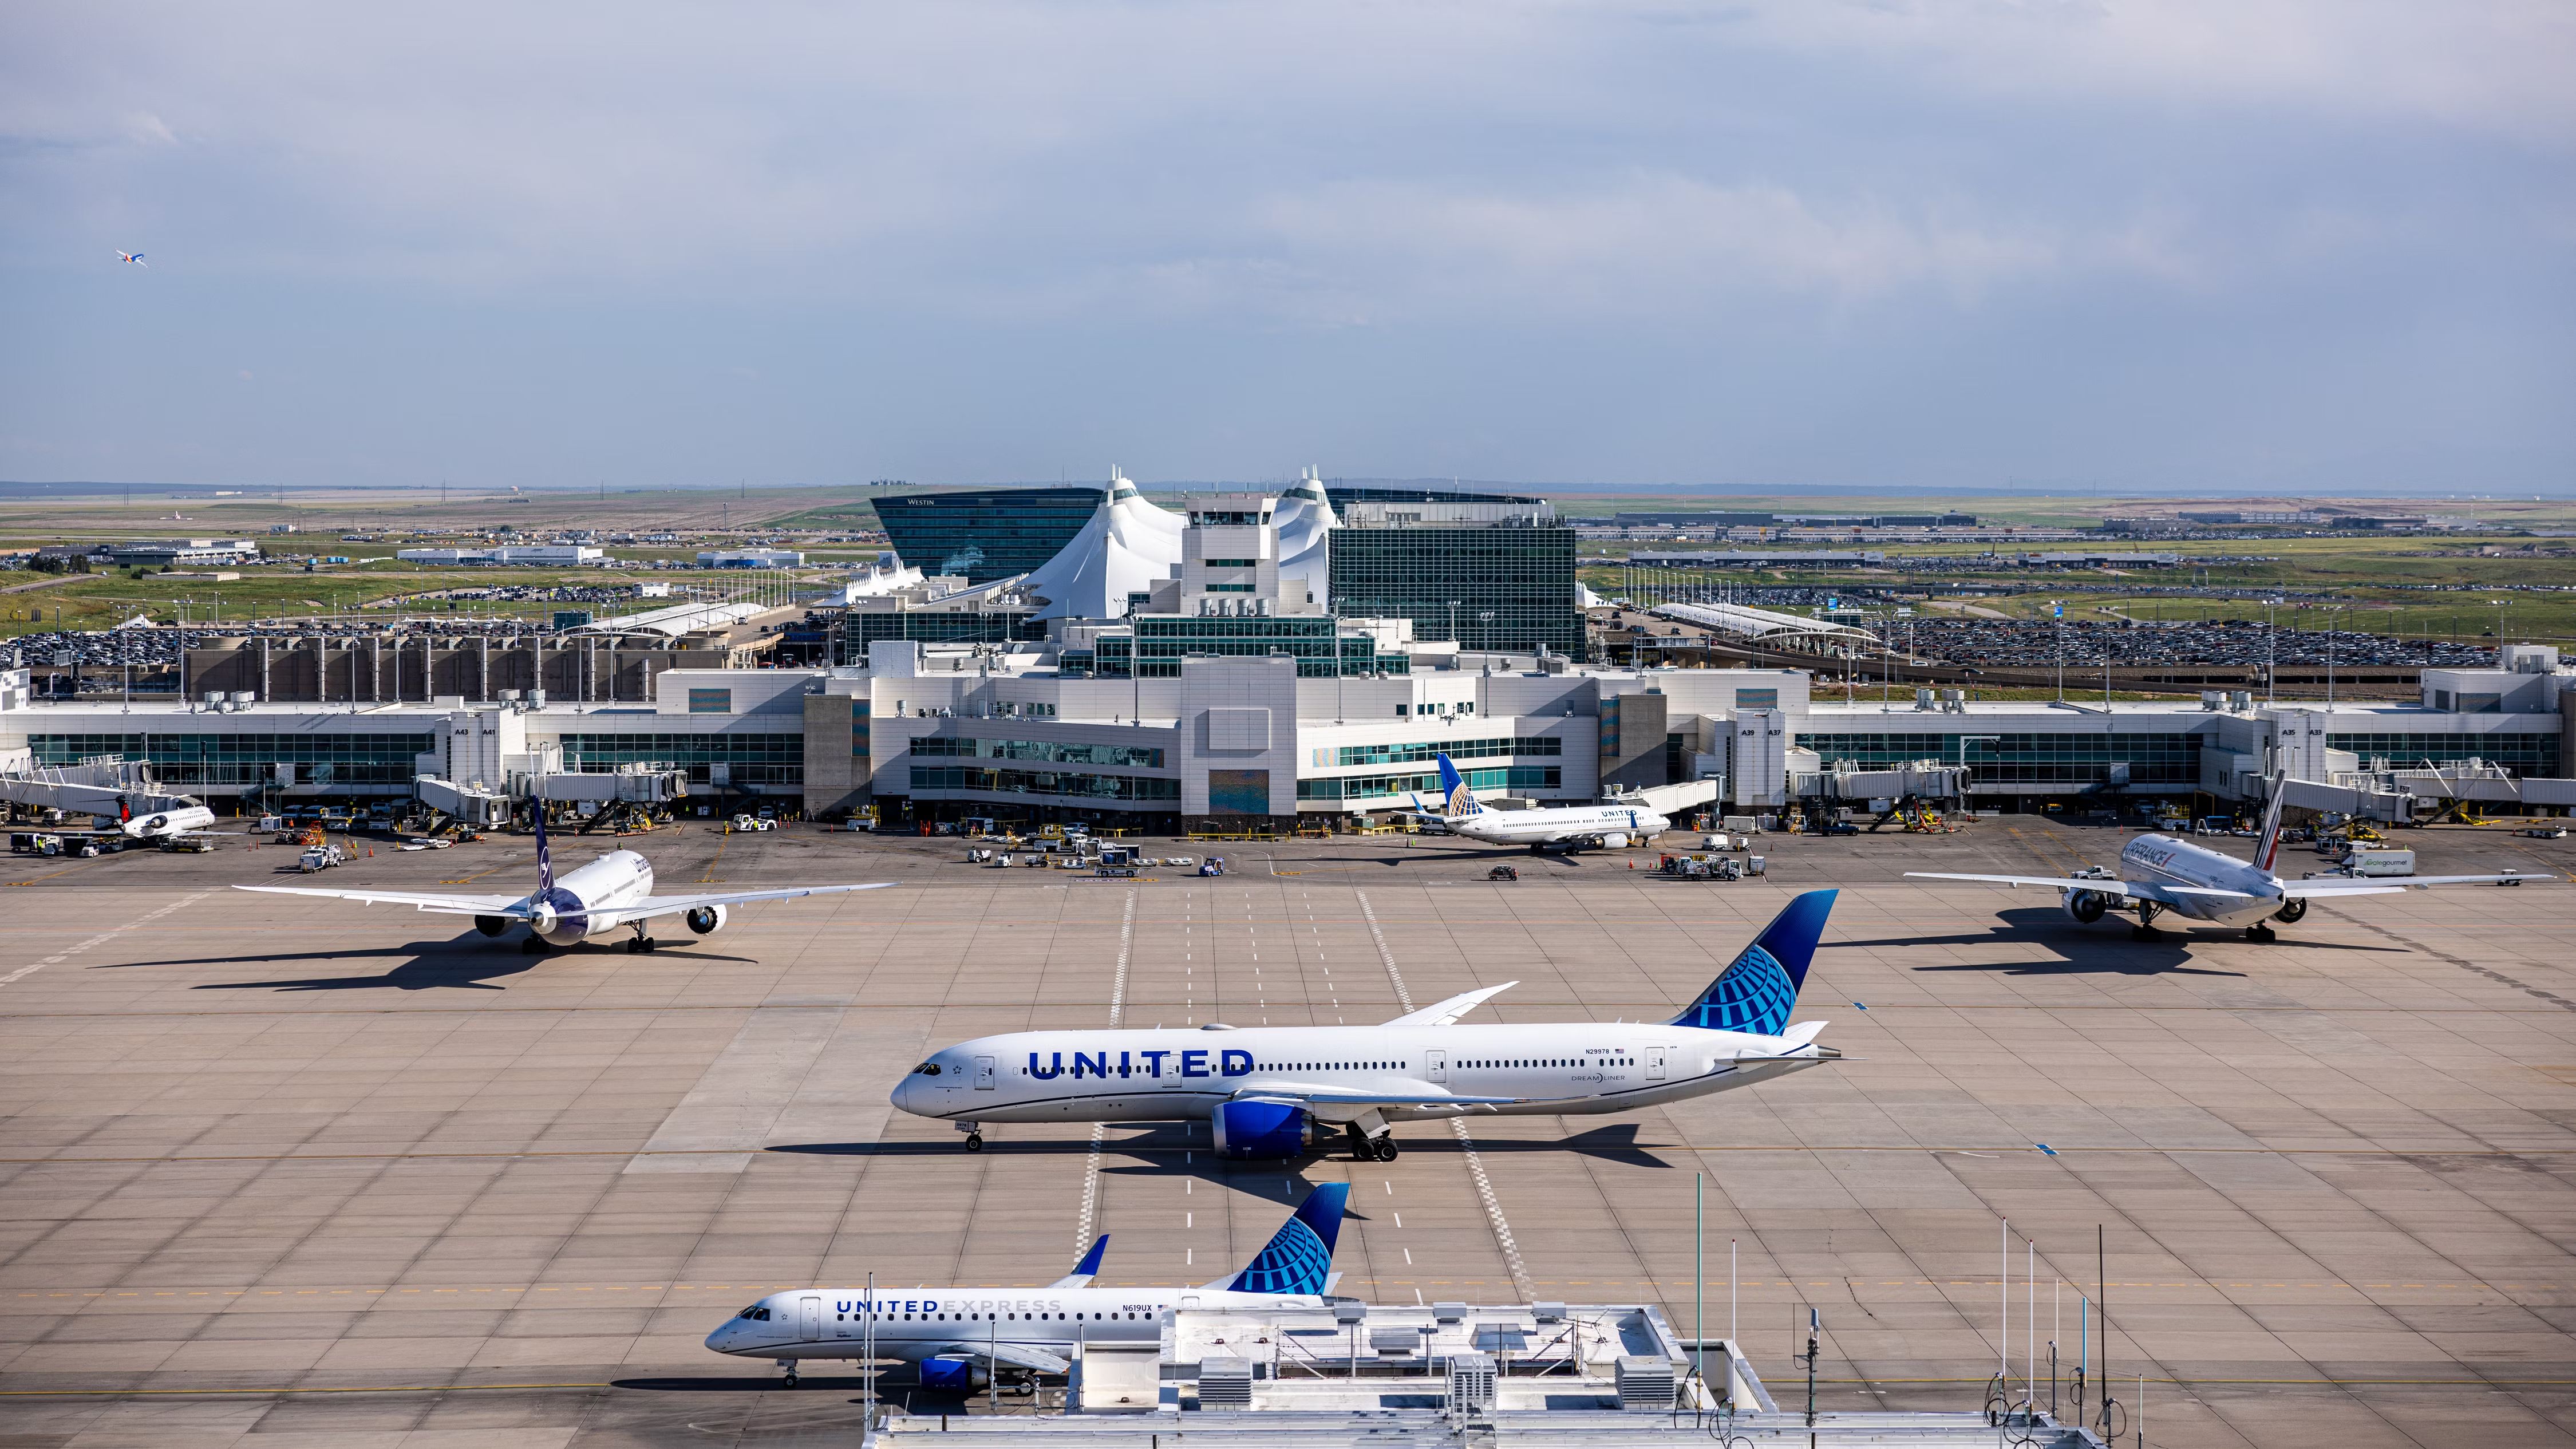 062823_airfield_airlines_united-235